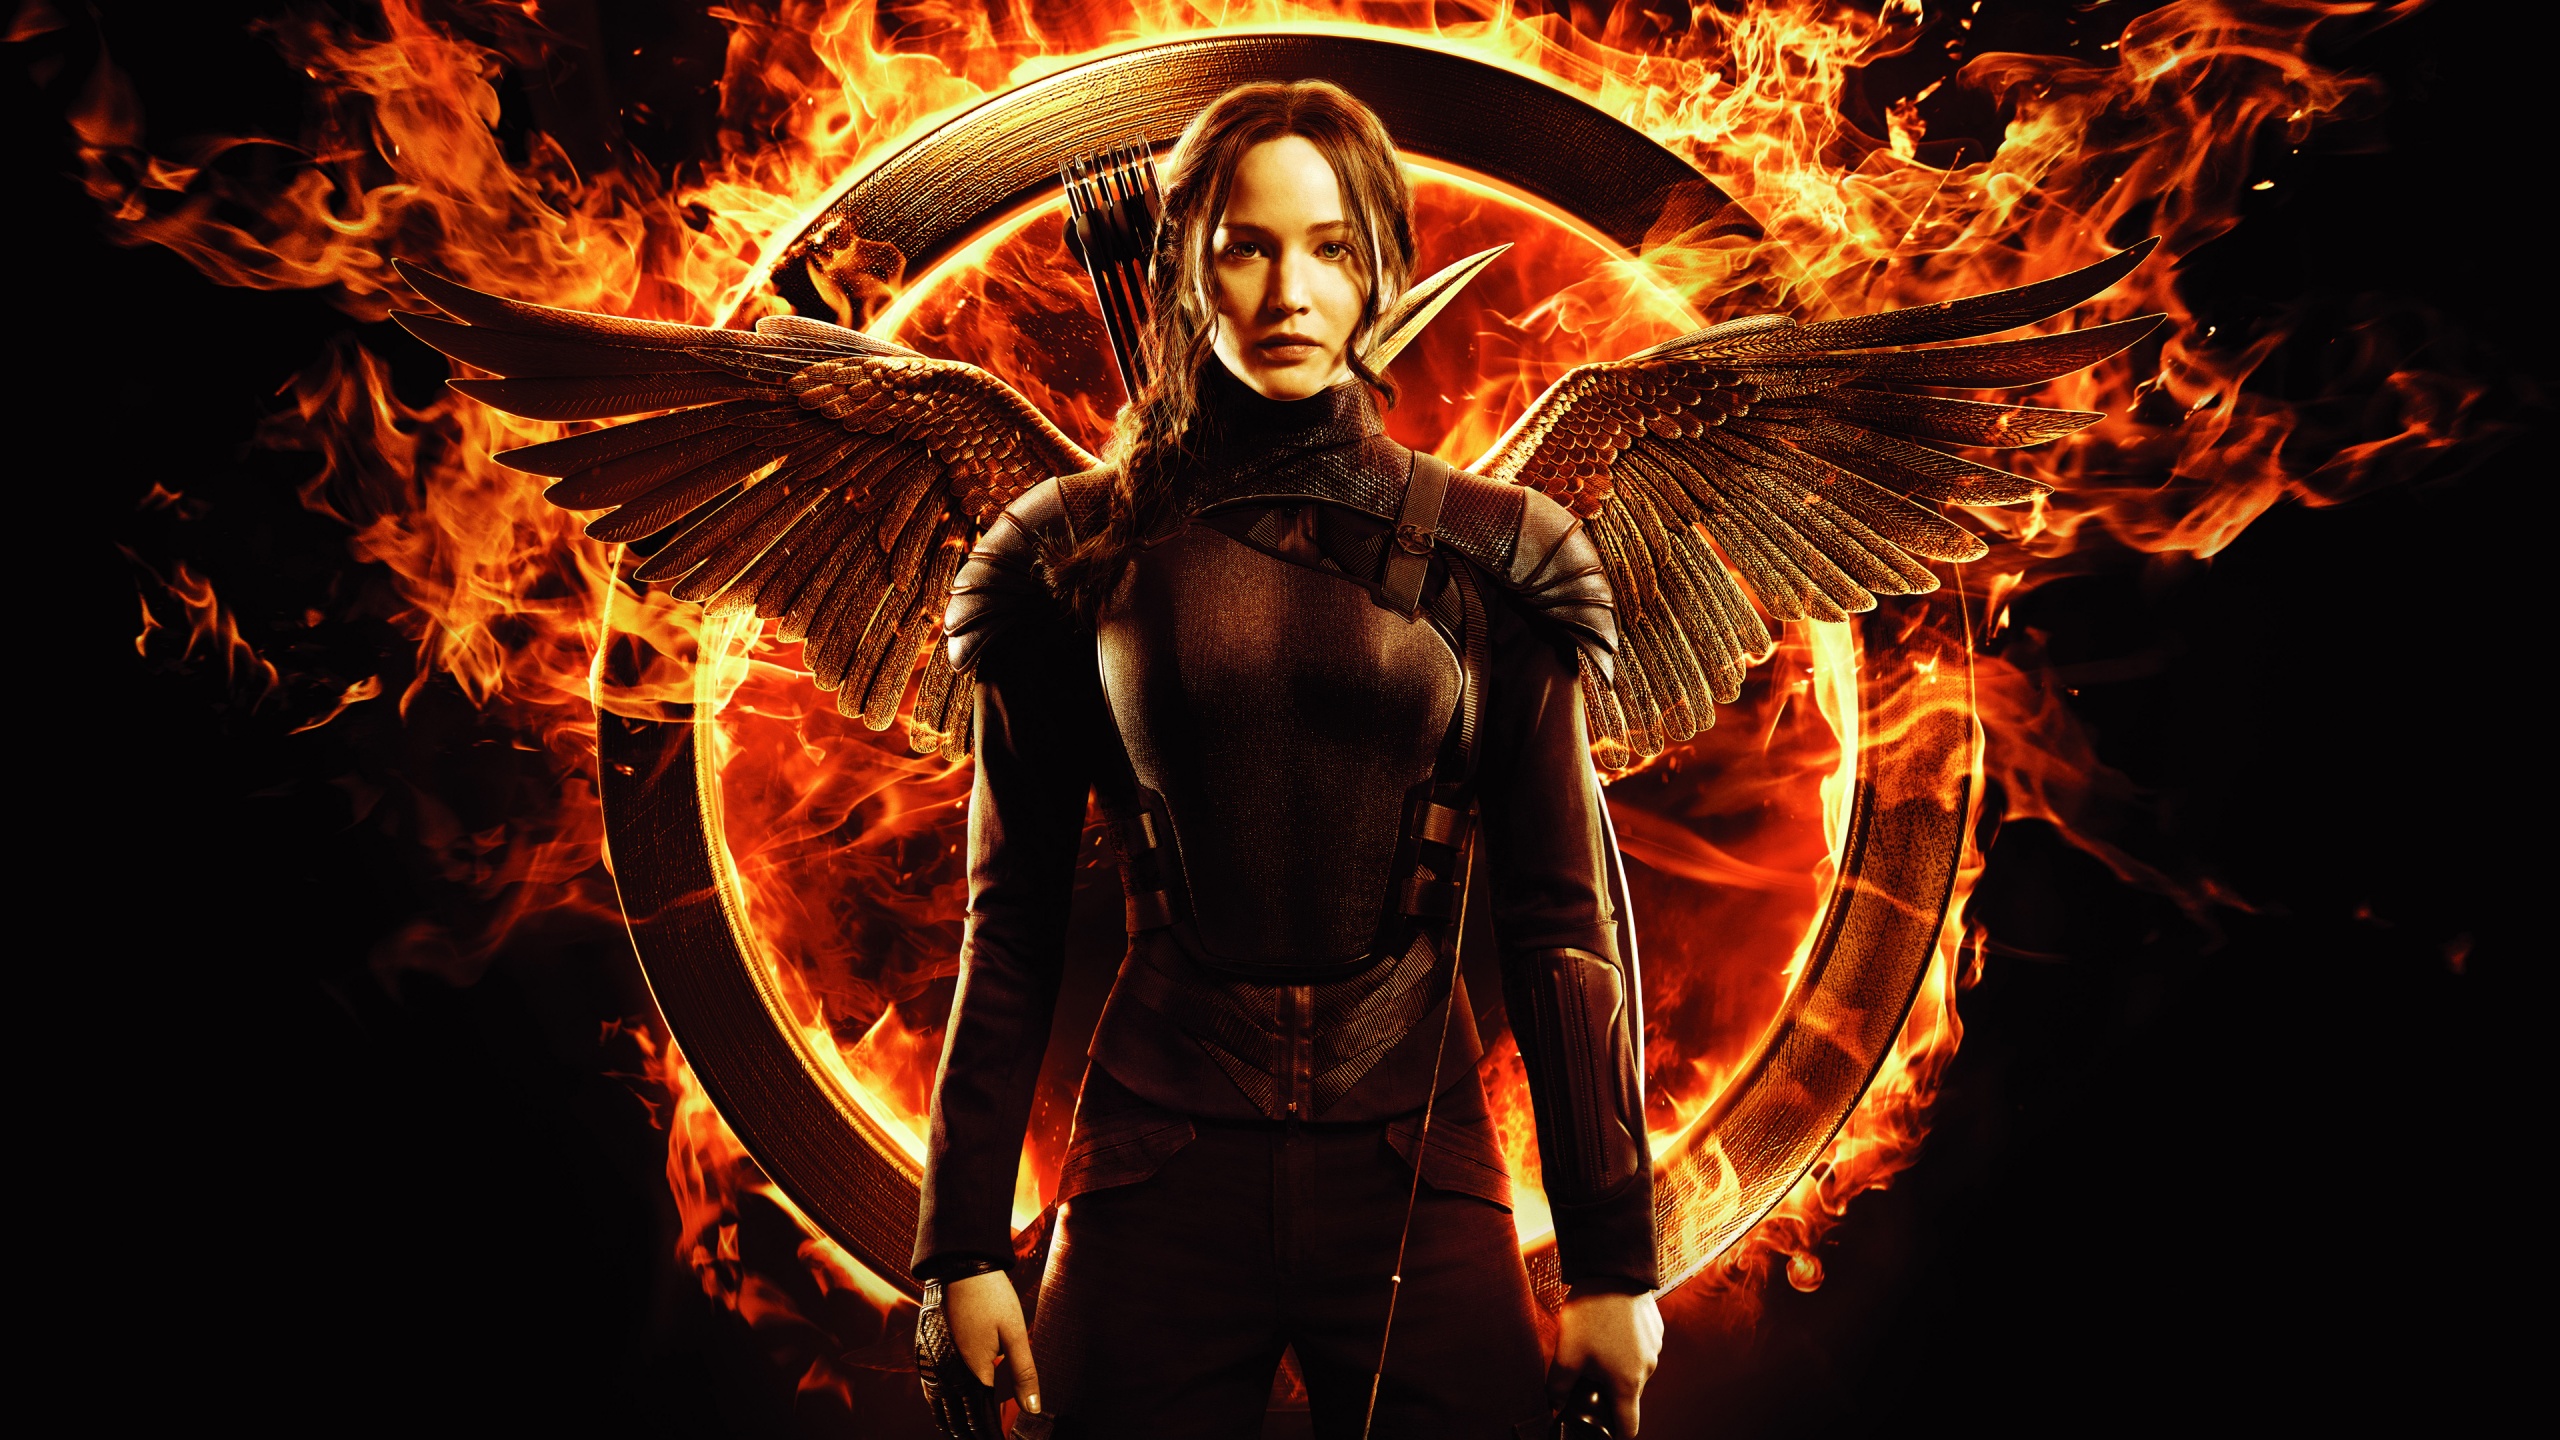  Lawrence in Hunger Games Mockingjay Wallpapers HD Wallpapers